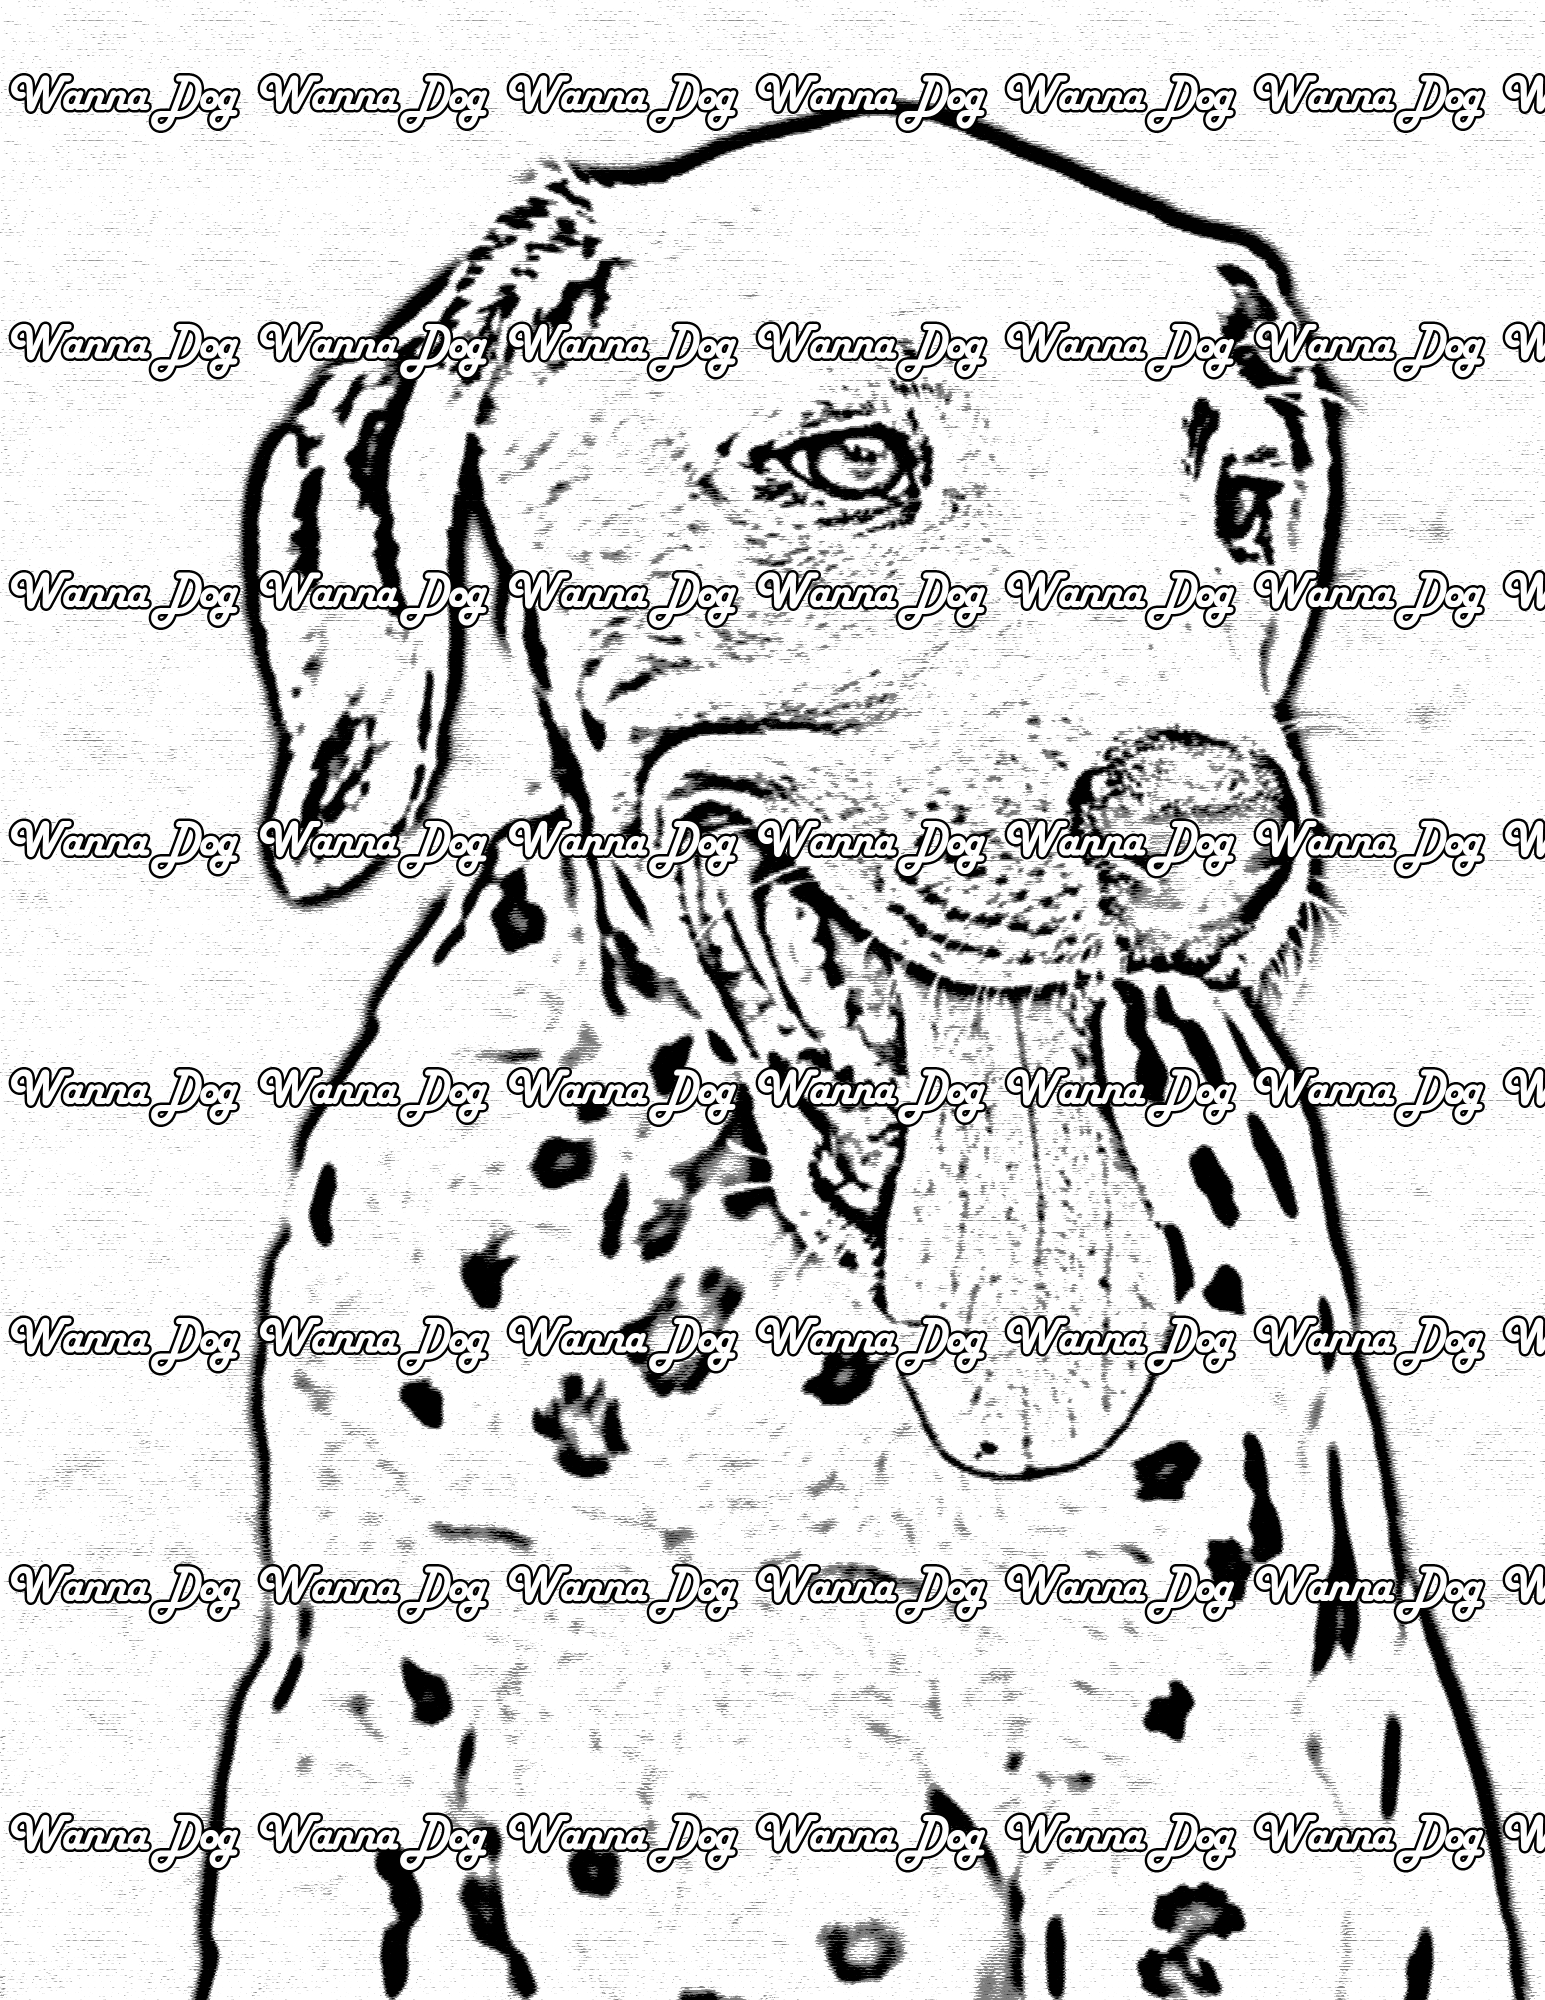 Dalmatian Puppy Coloring Page of a Dalmatian Puppy with their tongue out